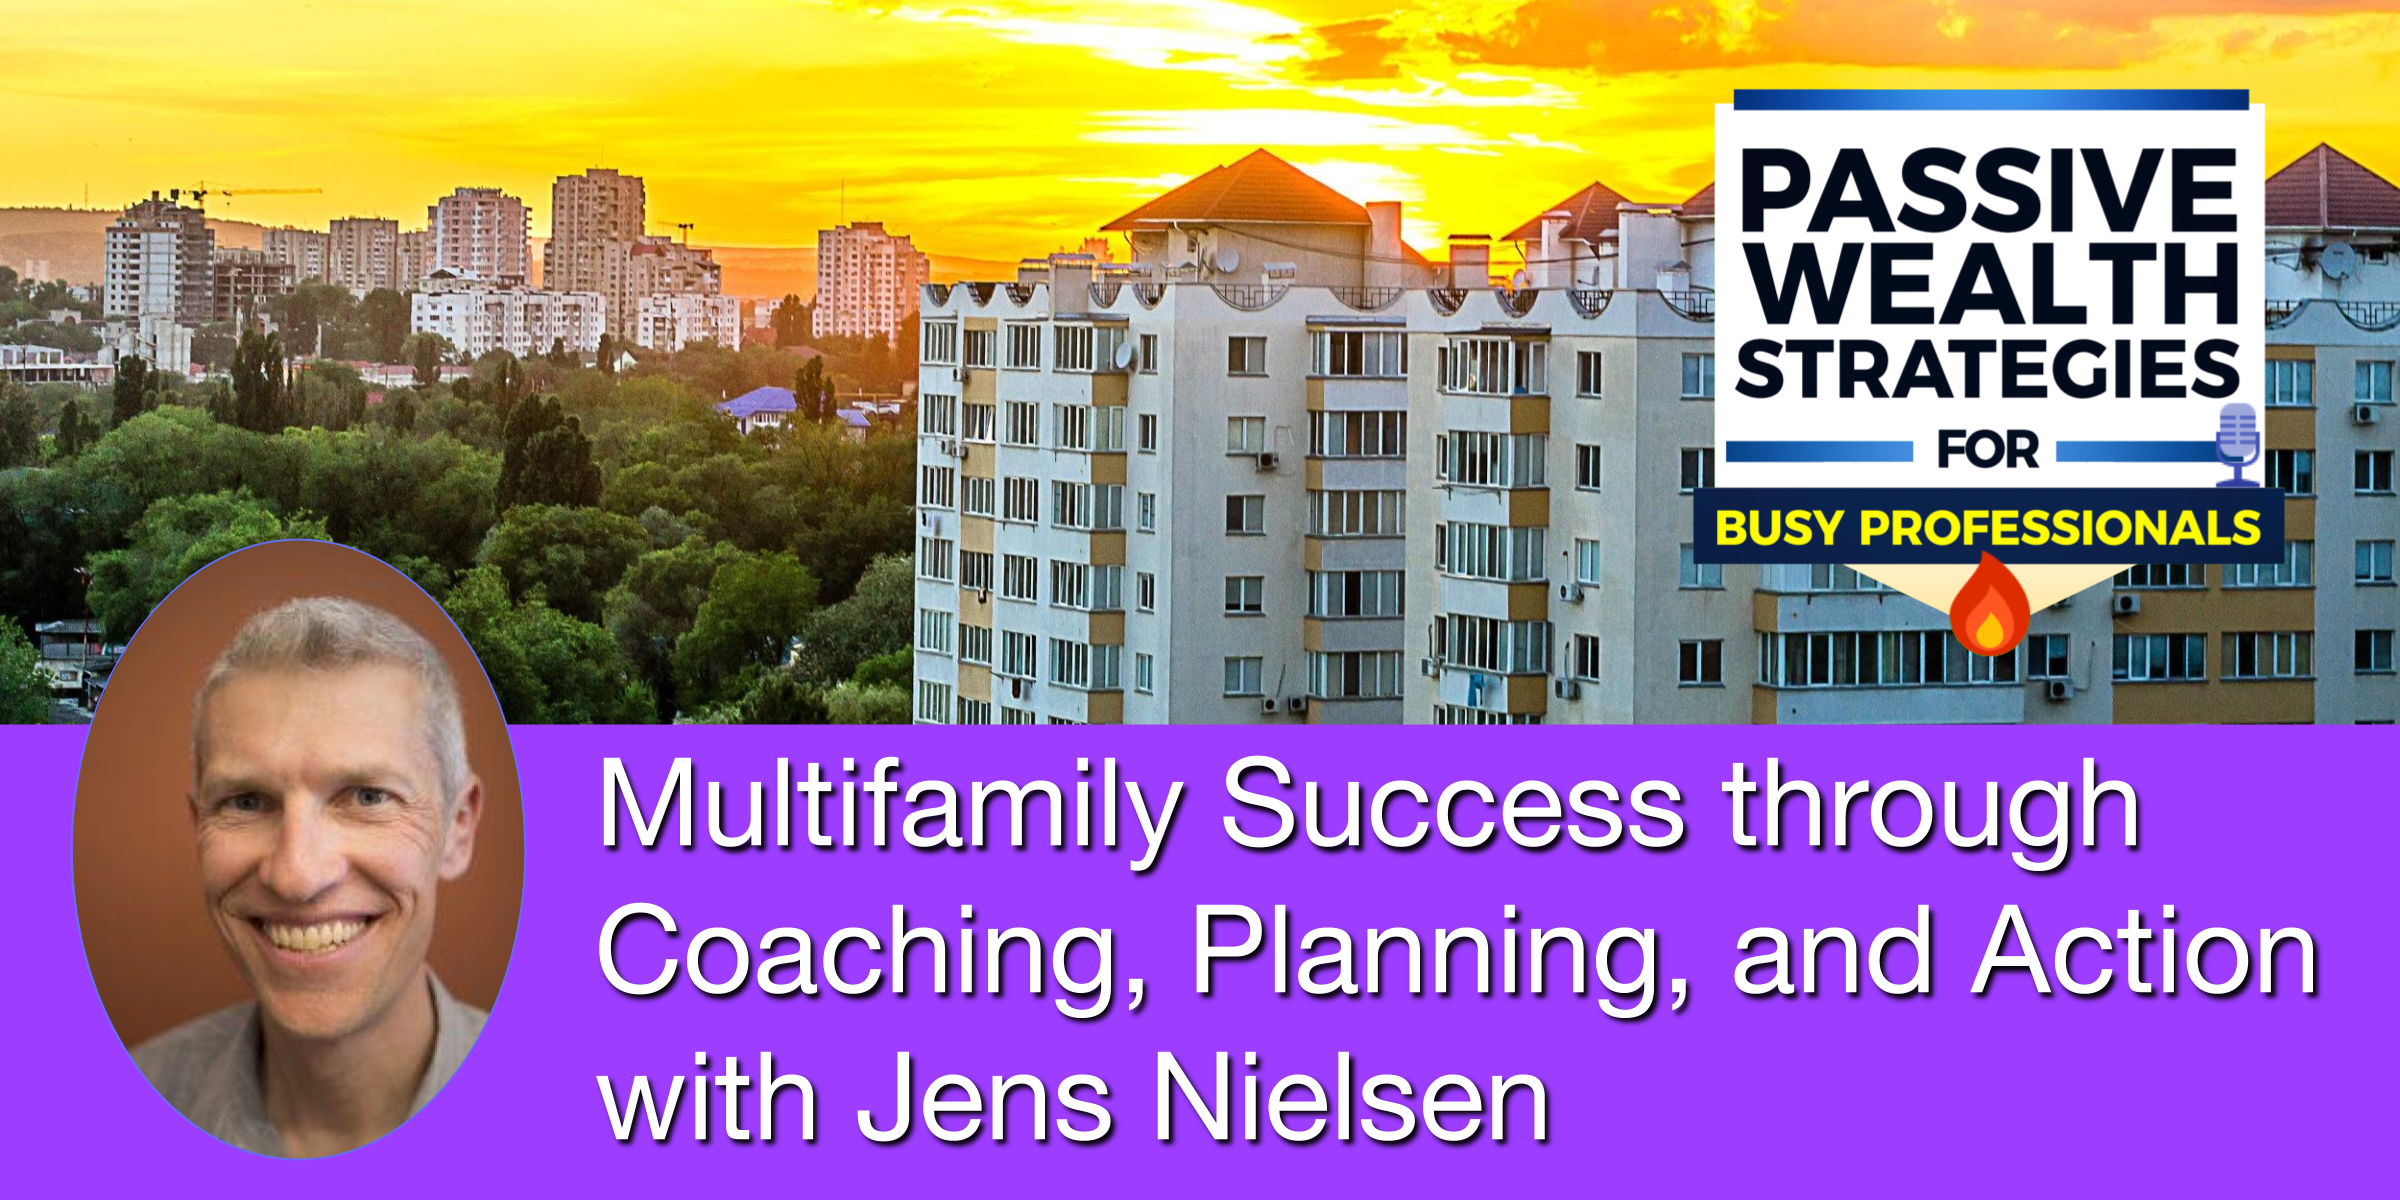 Multifamily Success through Coaching Planning and Action with Jens Nielsen